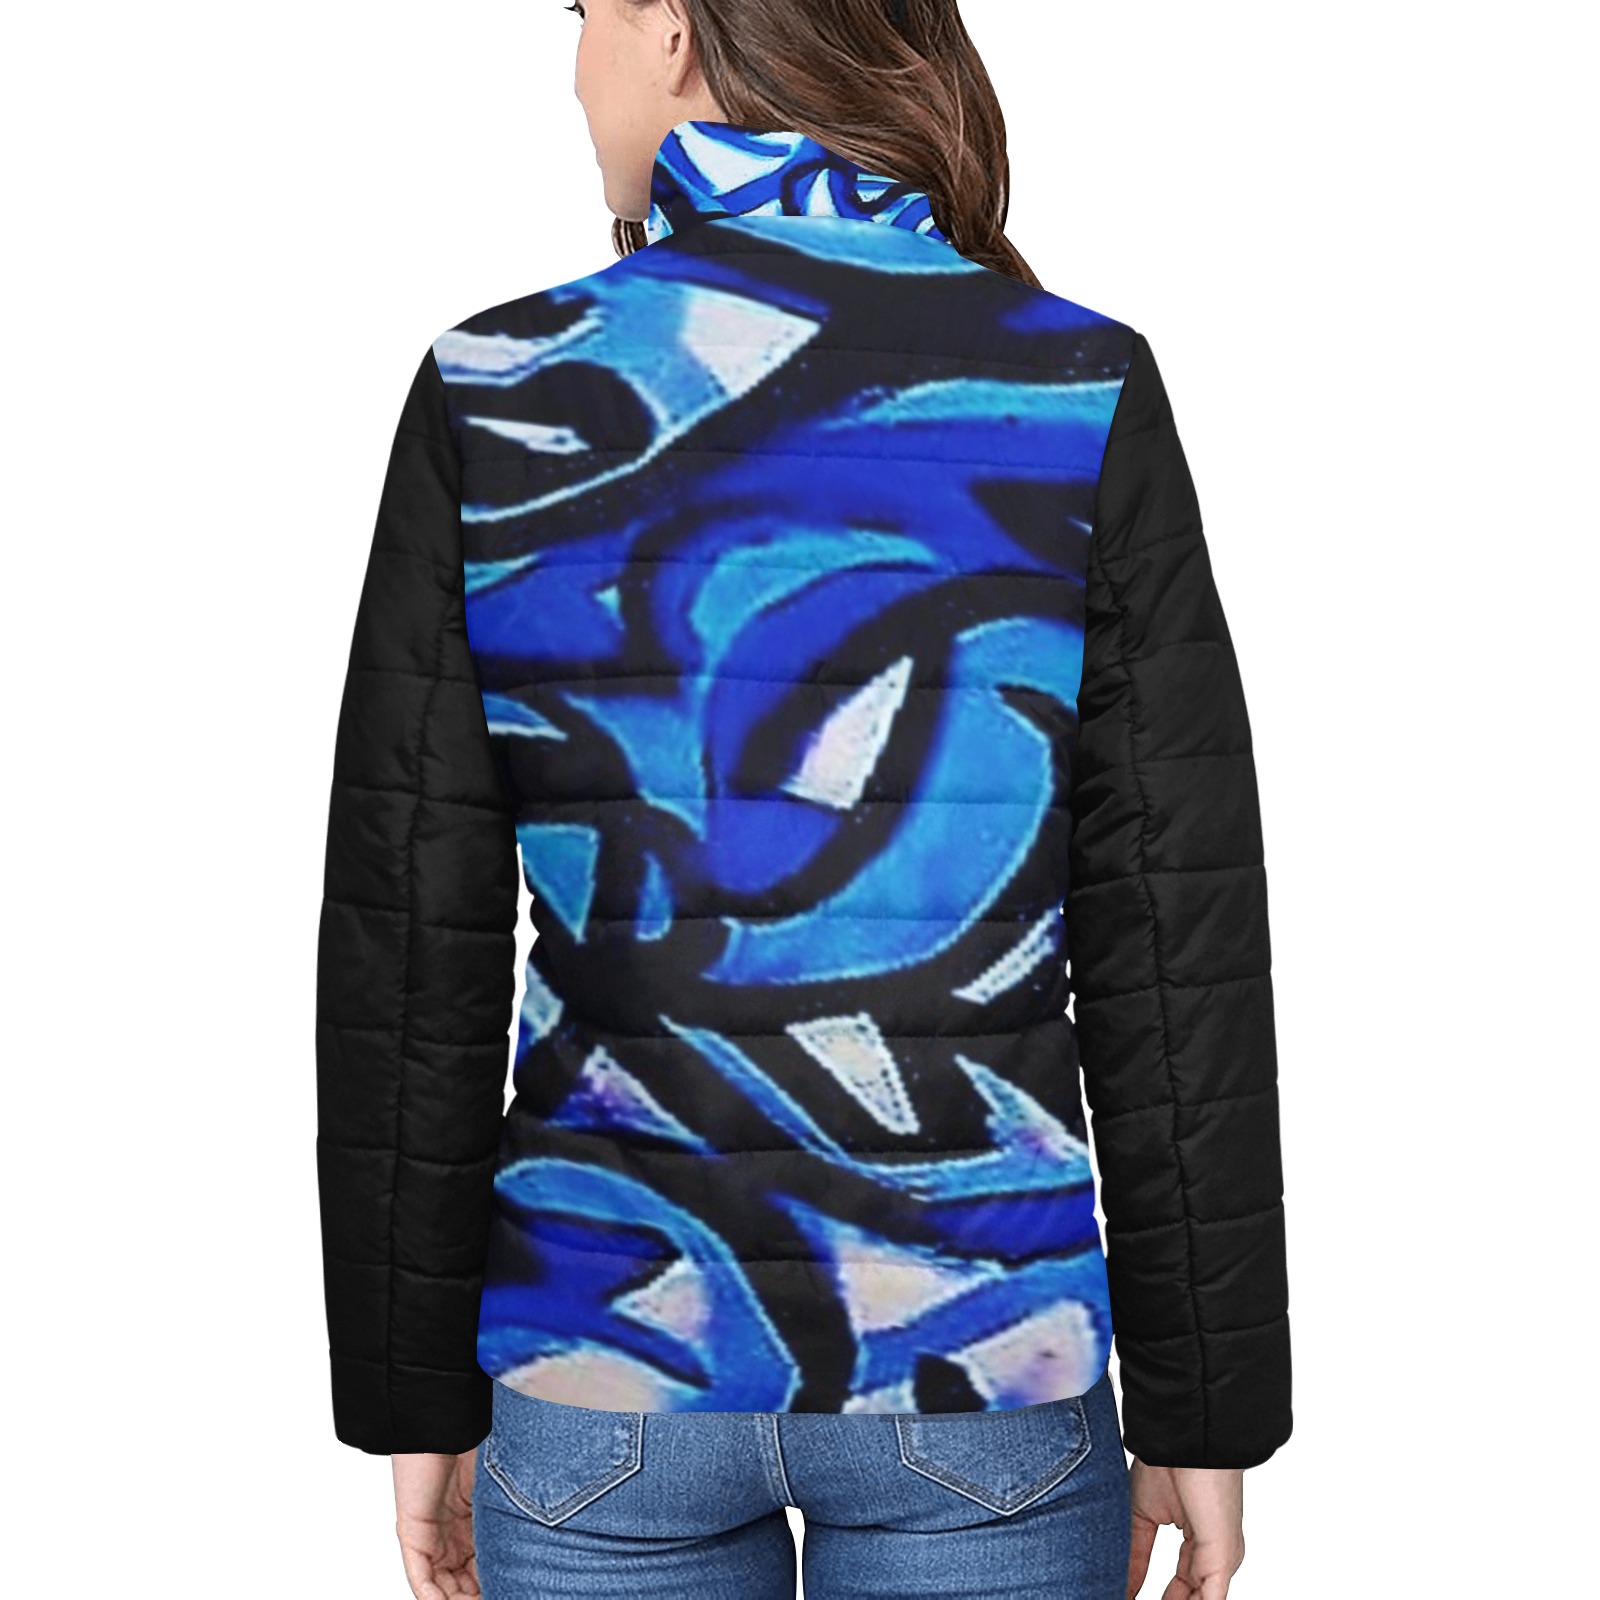 Blue Abstract Graffiti bomber jacket Women's Stand Collar Padded Jacket (Model H41)